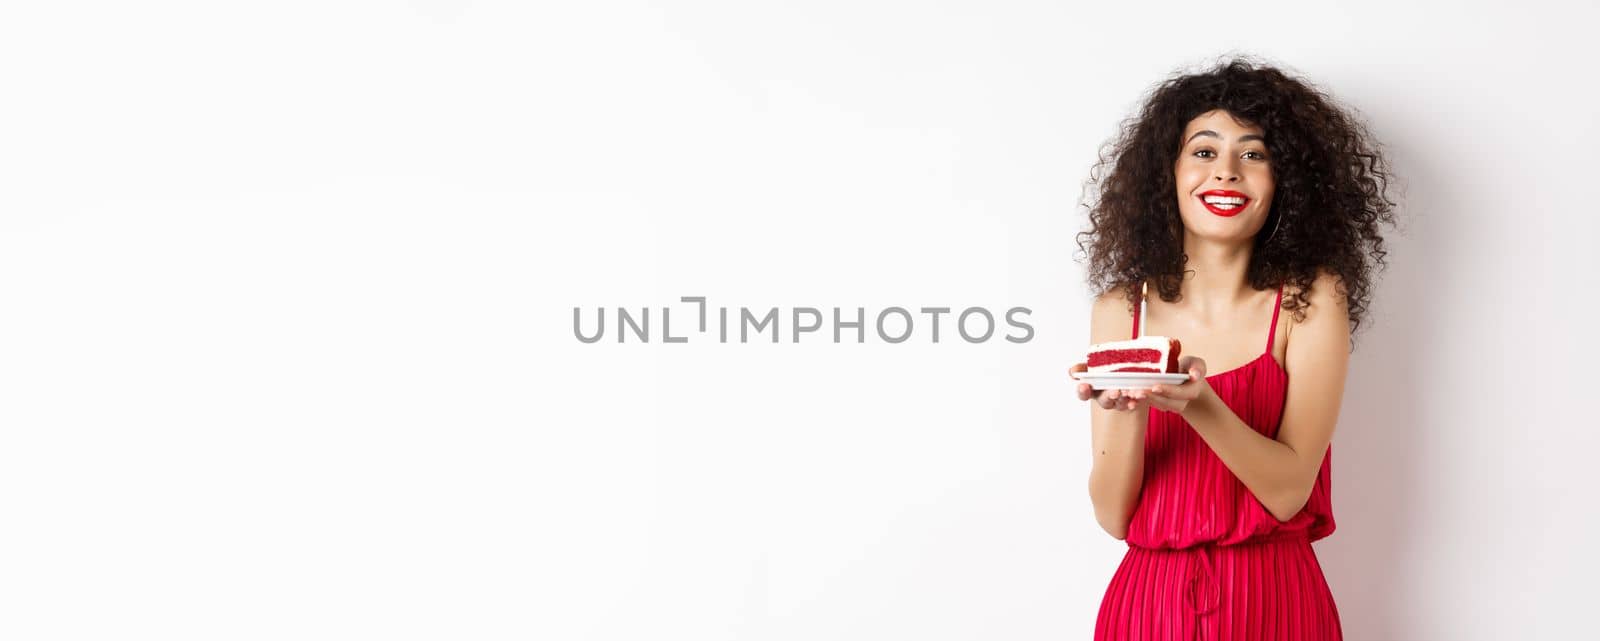 Beautiful lady in red dress celebrating birthday, holding piece of cake with candle and smiling, standing happy on white background.